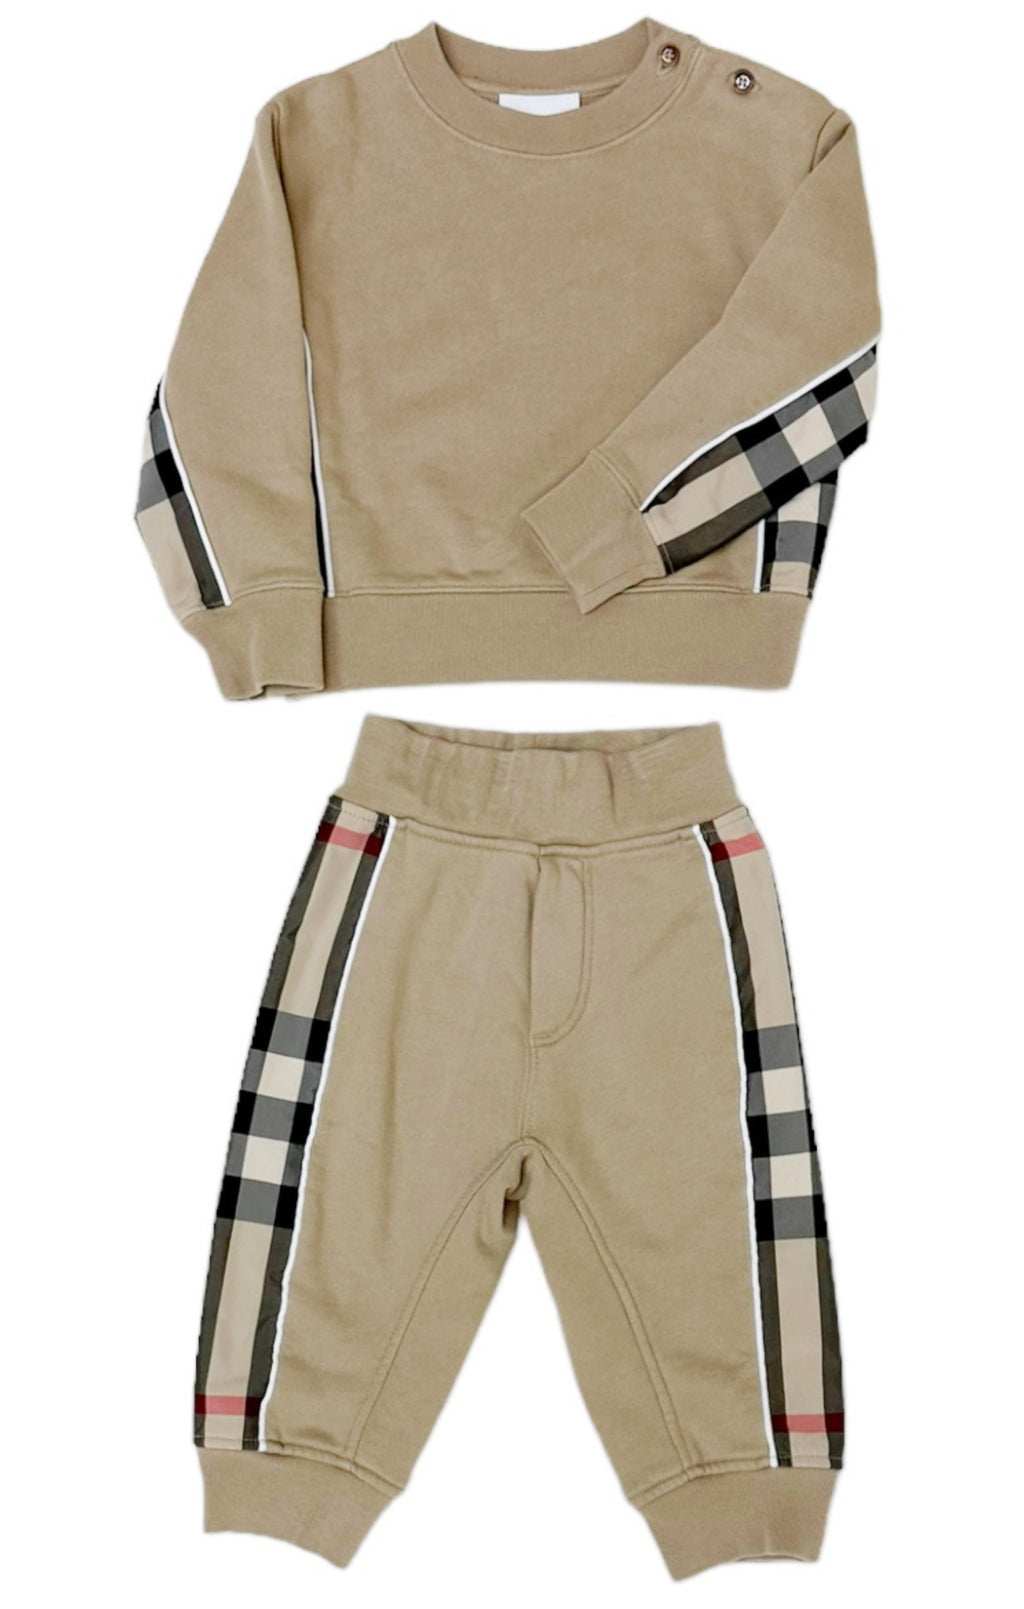 BURBERRY Sweatsuit Size: 12 Months